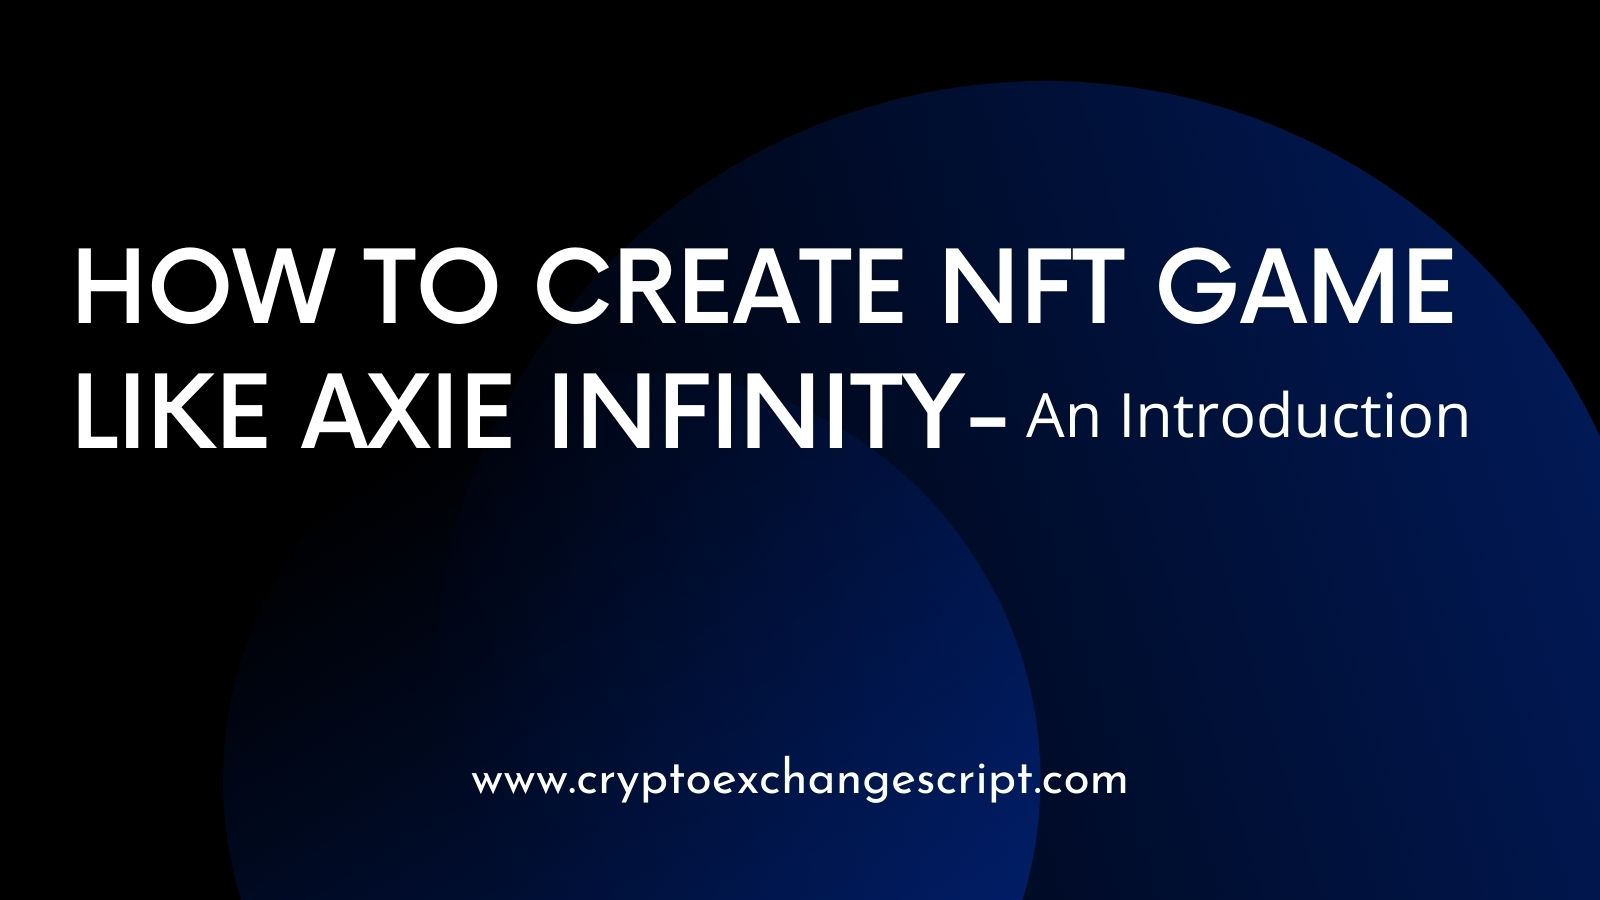 How to Build NFT Based Gaming like Axie Infinity? - An Introduction